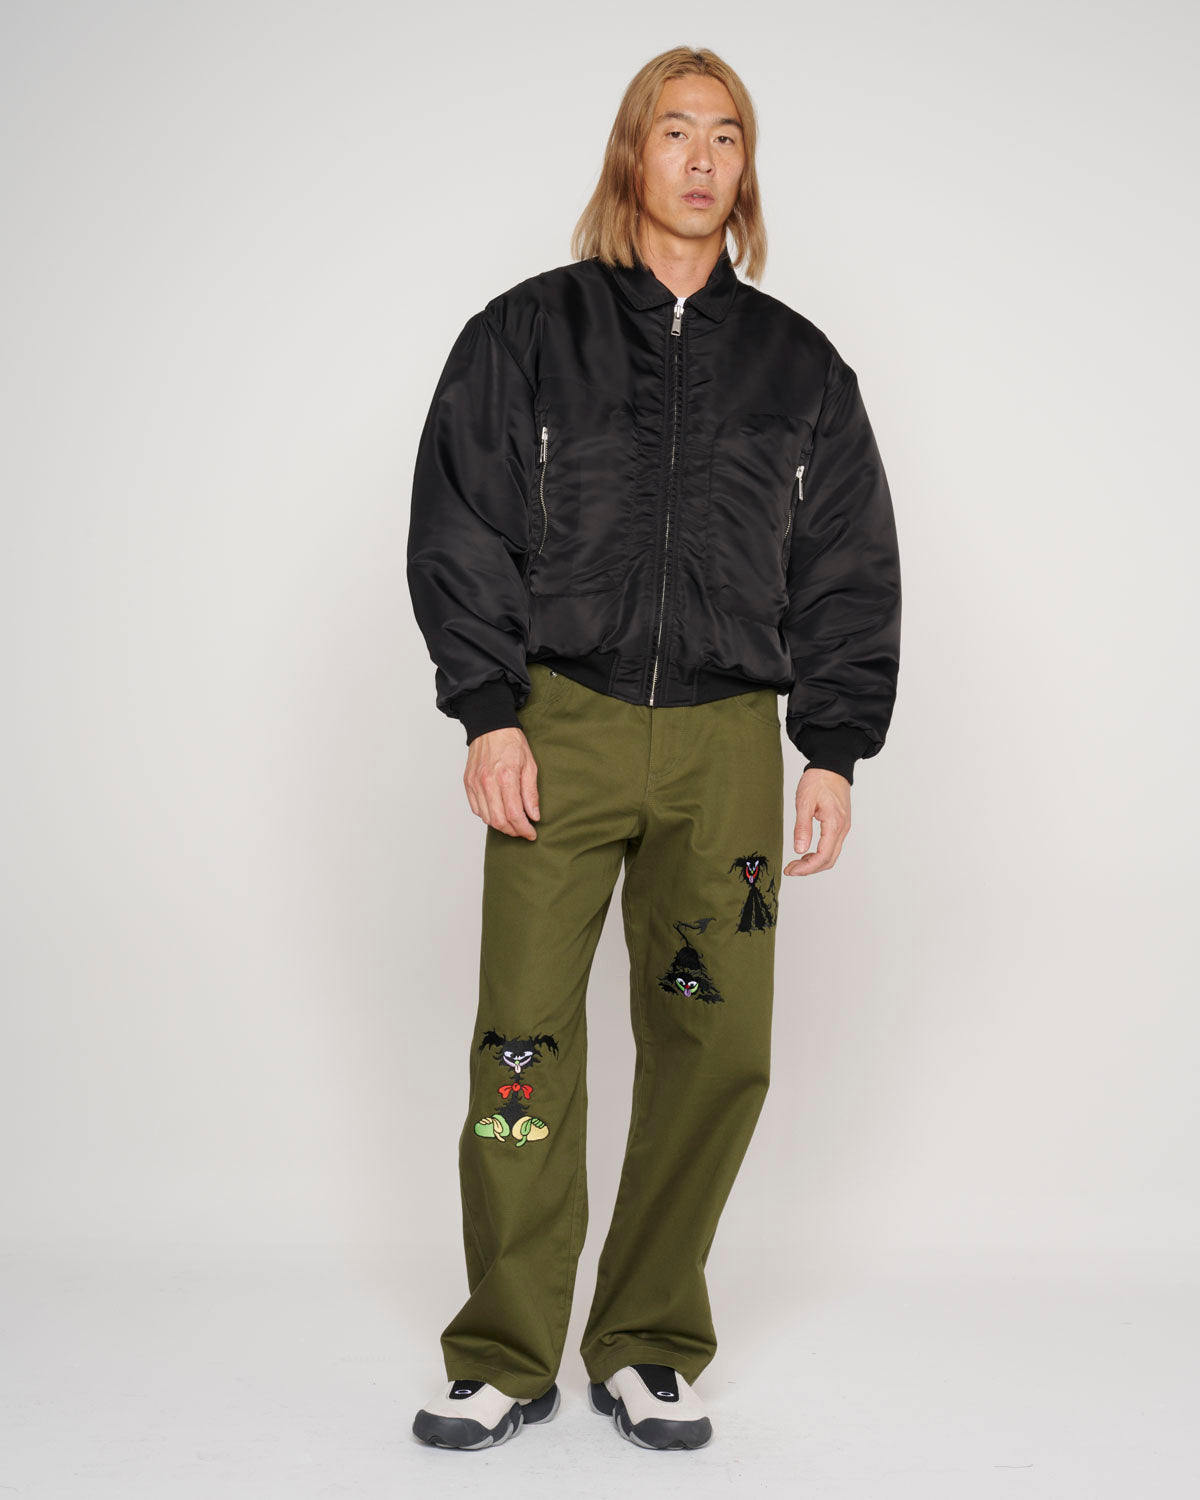 Twisted Snout Embroidered Pant - Olive 11